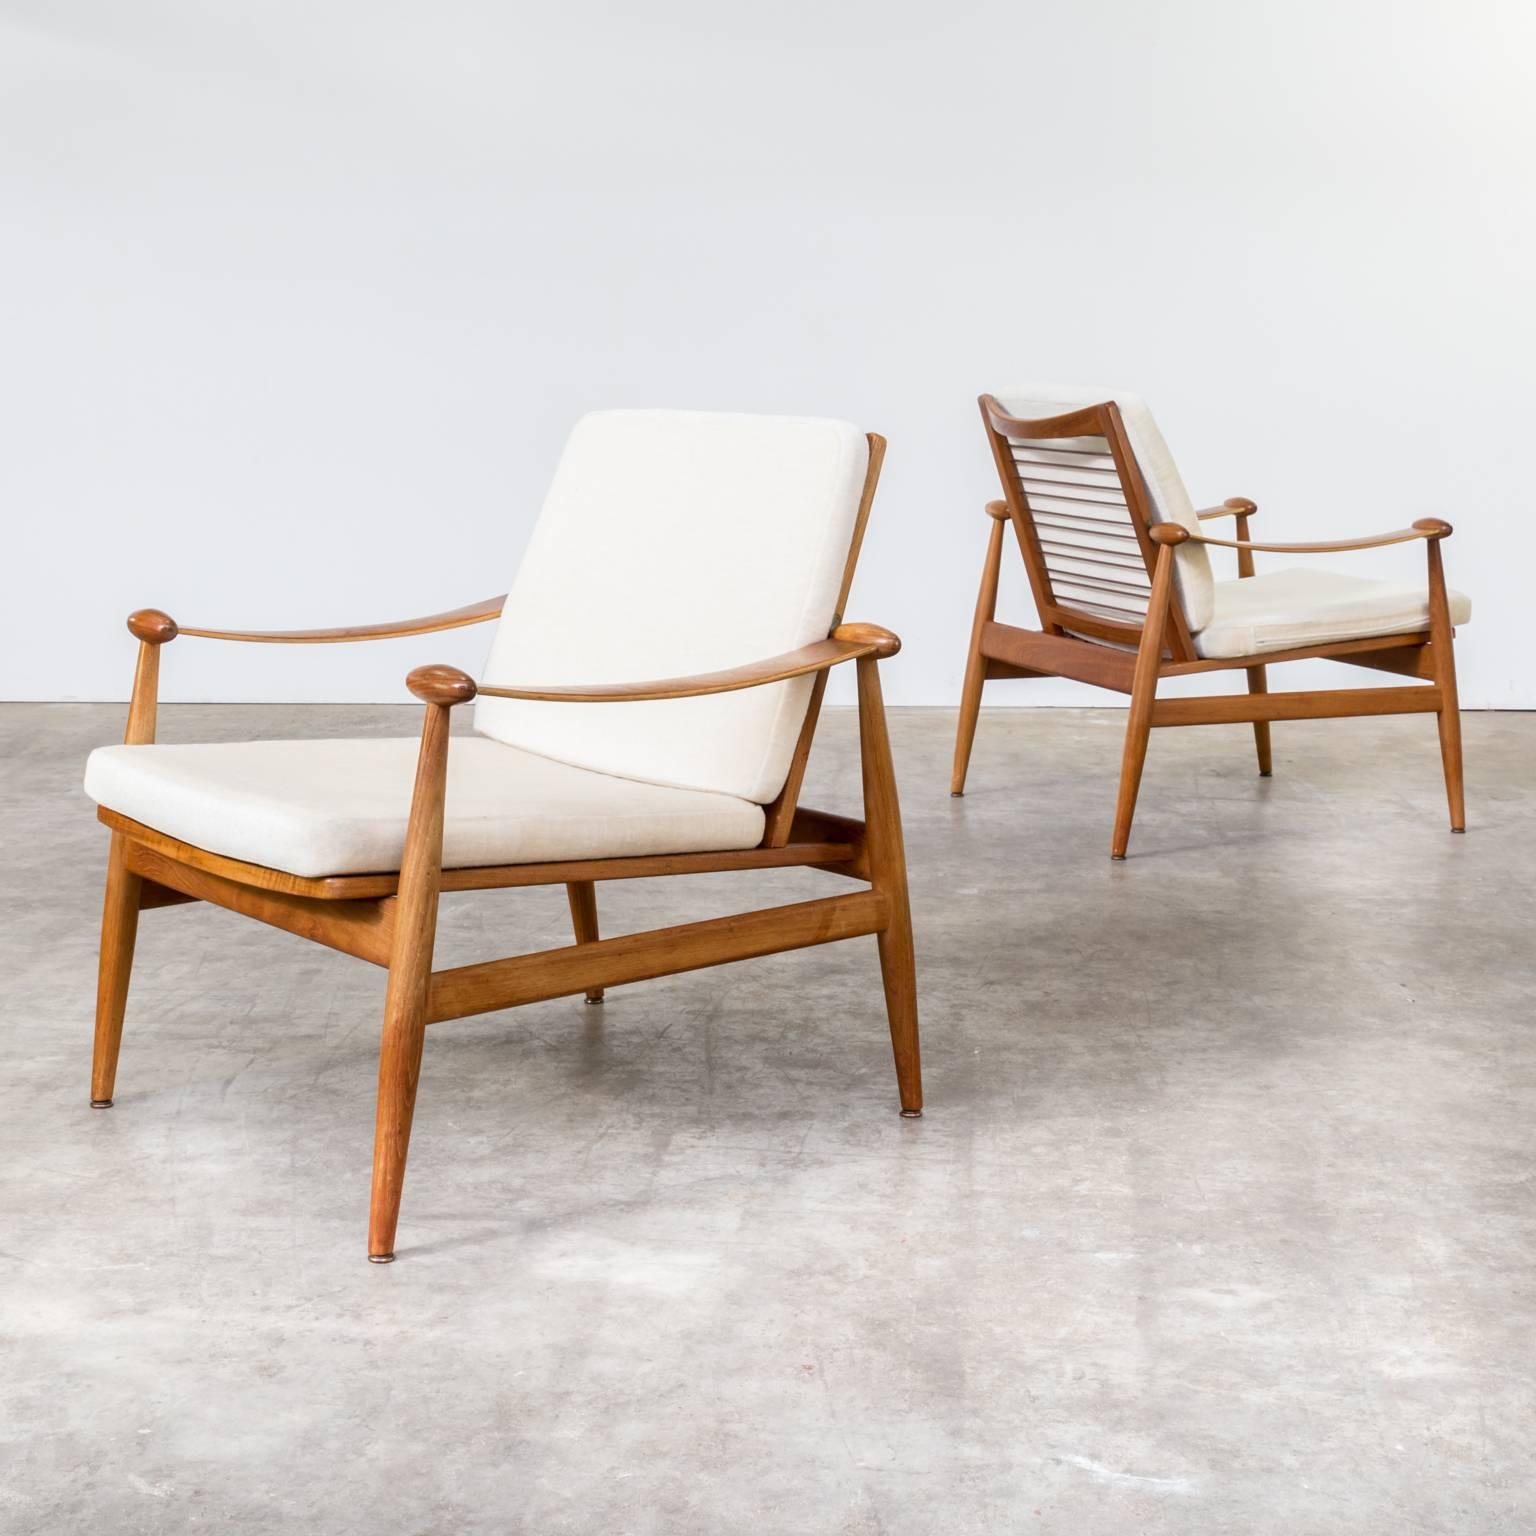 Set of two 1960s Finn Juhl FD-133 Spade fauteuils for France & Son. This pair of Spade Chairs FD 133 was designed by Finn Juhl in 1953. They are made from solid teak wood and removable cushions. The set is in very good condition.